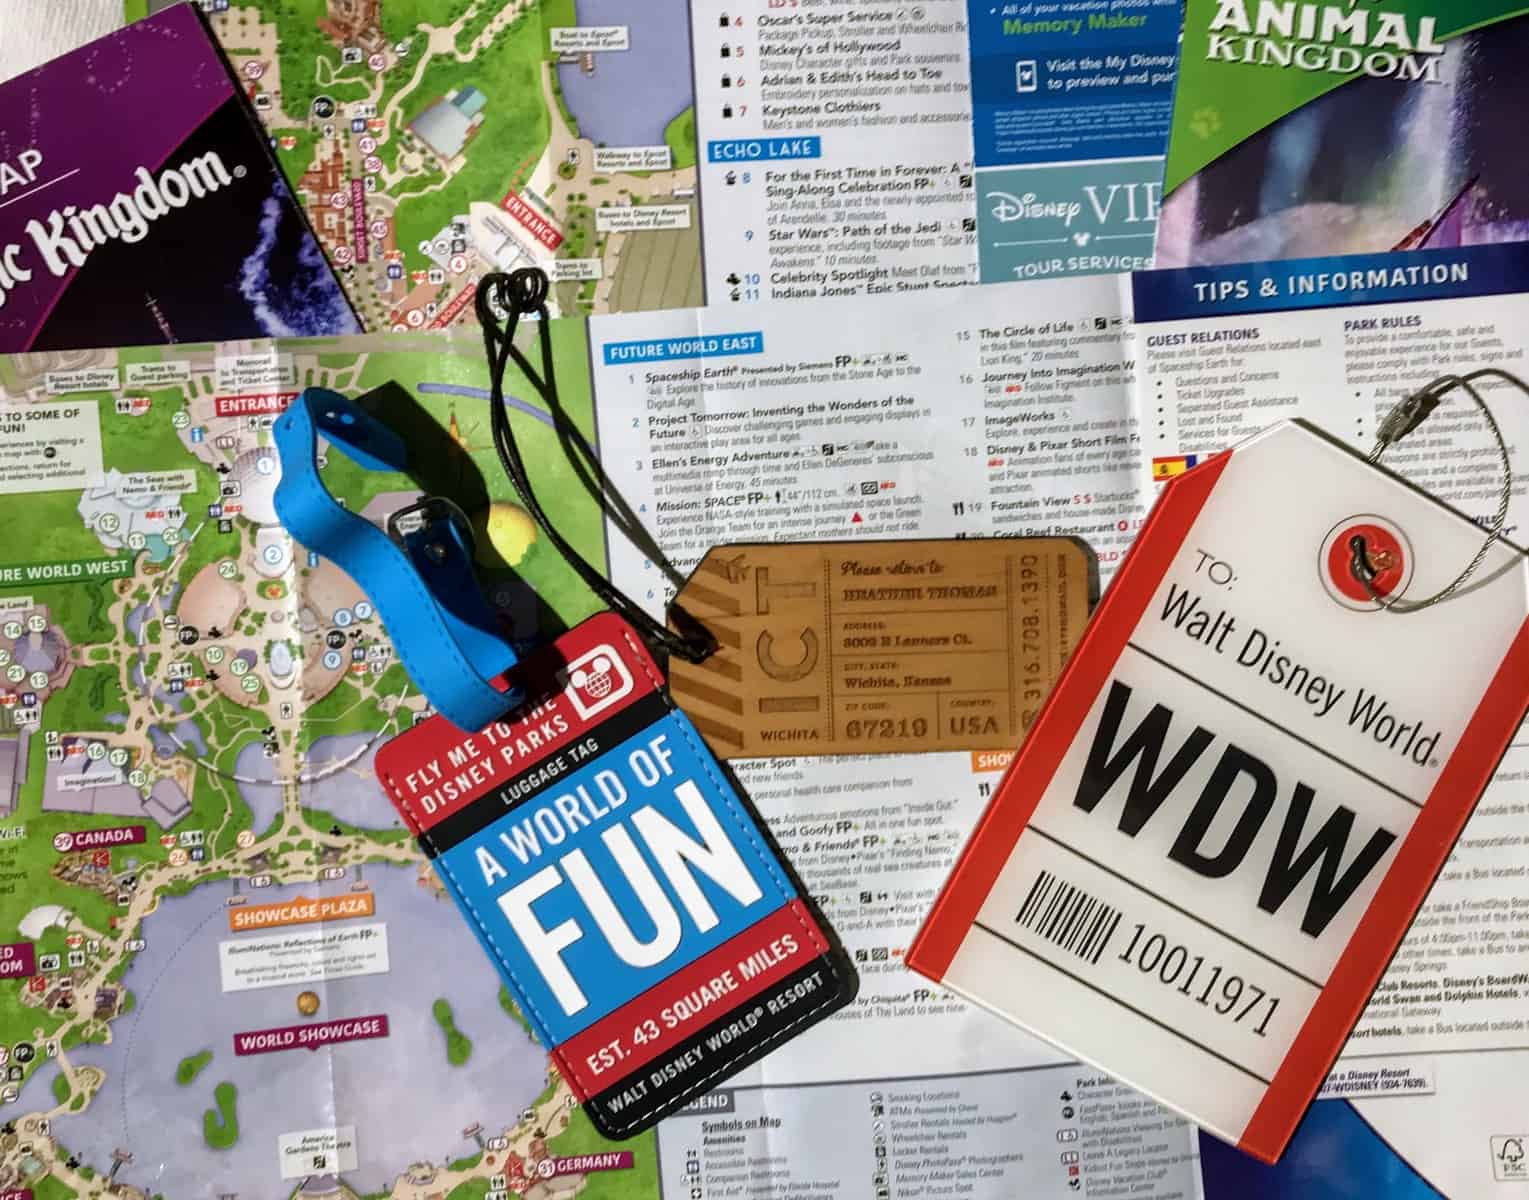 Disney World maps – download for the parks, resorts, parties + more